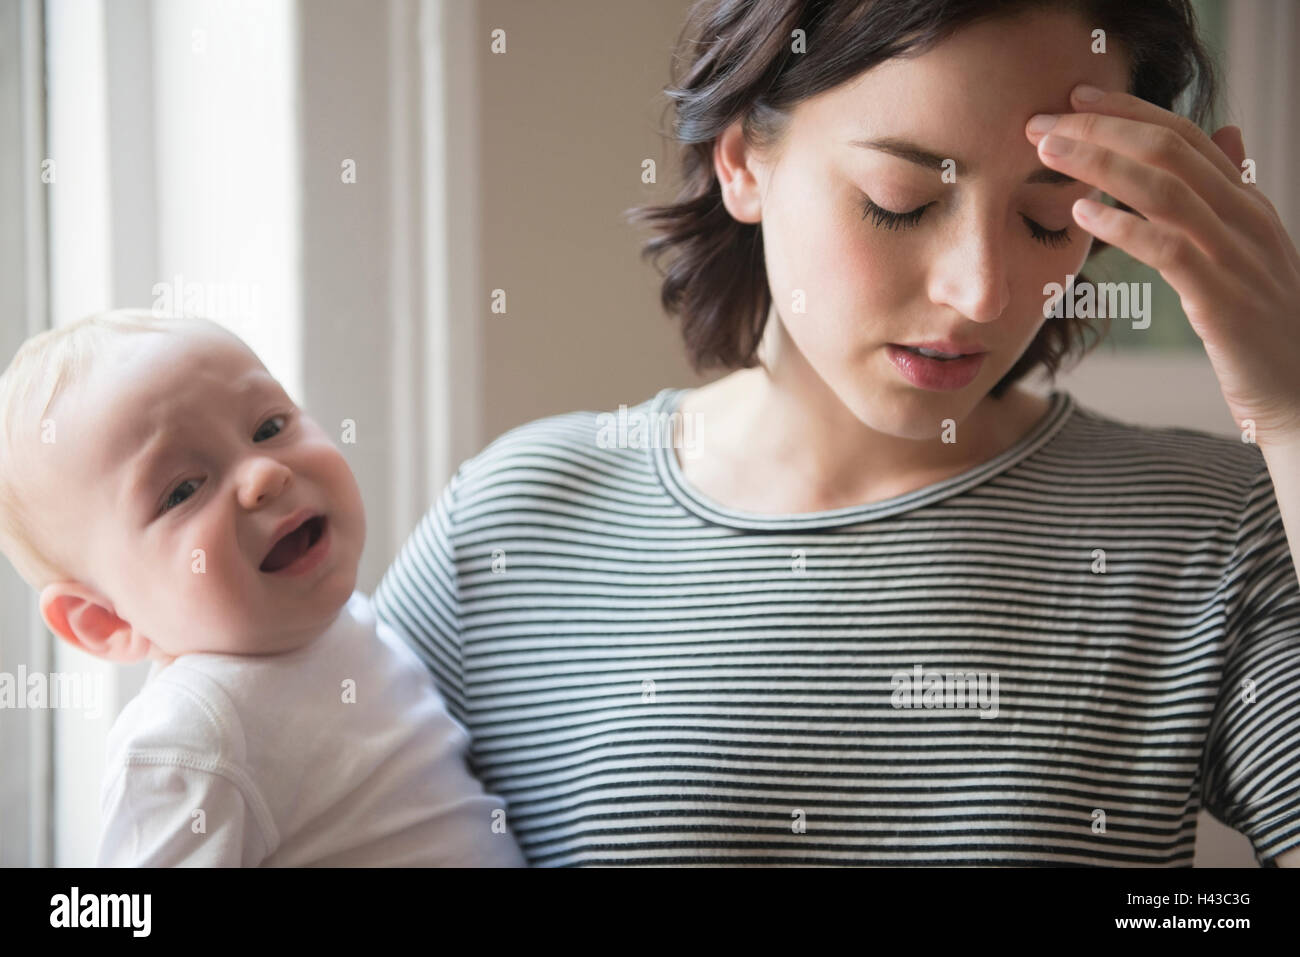 Caucasian mother rubbing forehead while holding baby son Stock Photo